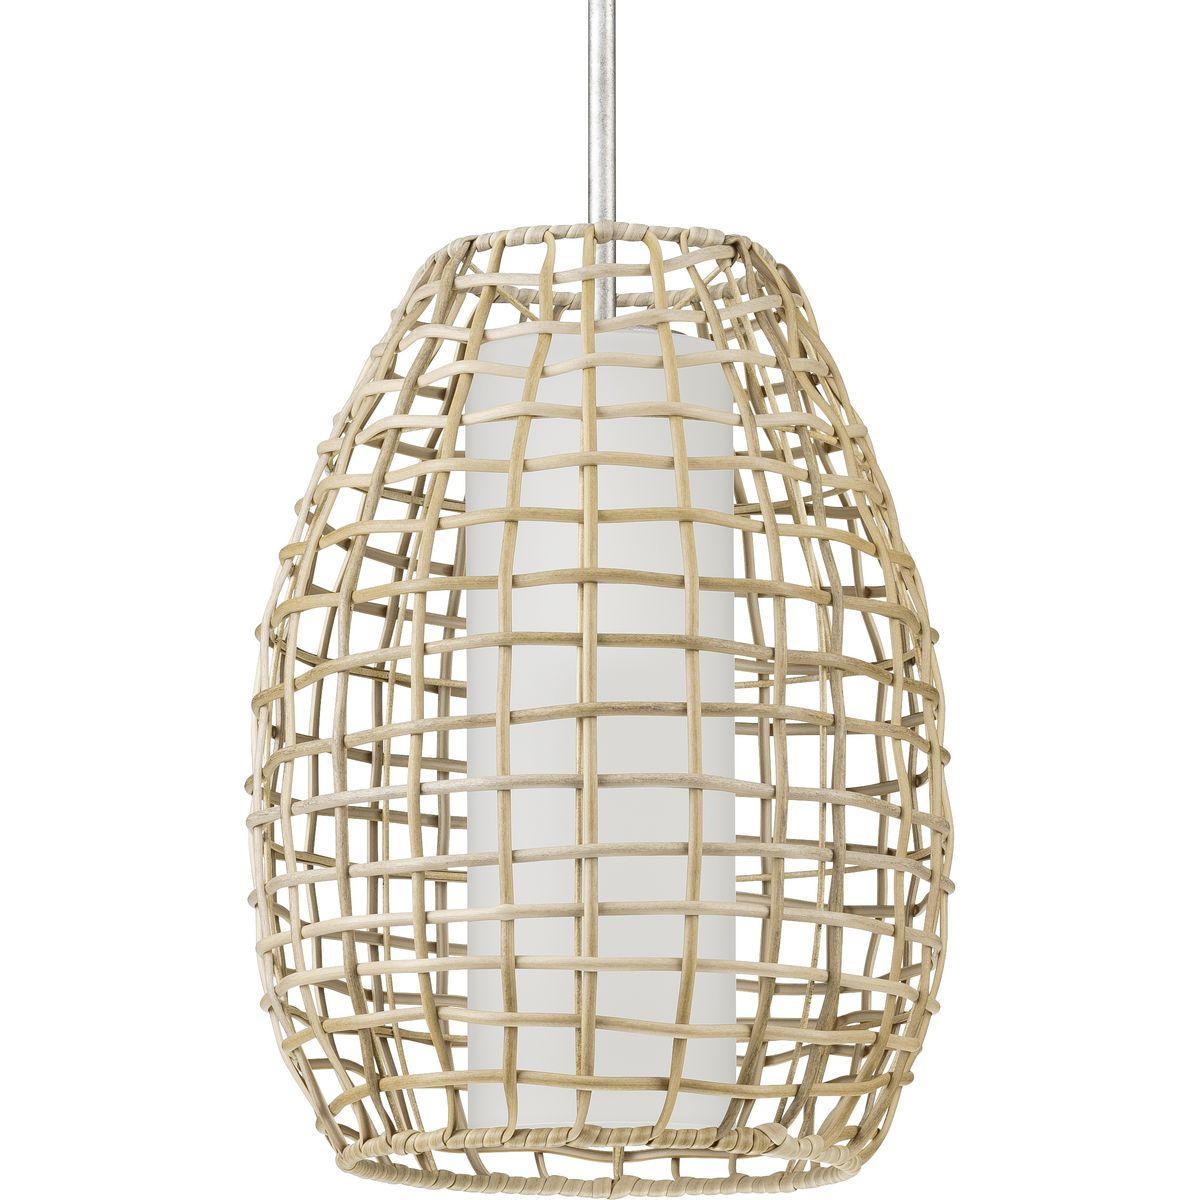 Hubbell P550083-141 Unite global feel and coastal warmth with the Pawley Collection 1-Light Natural Rattan Coastal Outdoor Hanging Pendant Light. The synthetic light natural rattan frame has a graceful, lattice-like design that gives the fixture charm and depth. A light sour